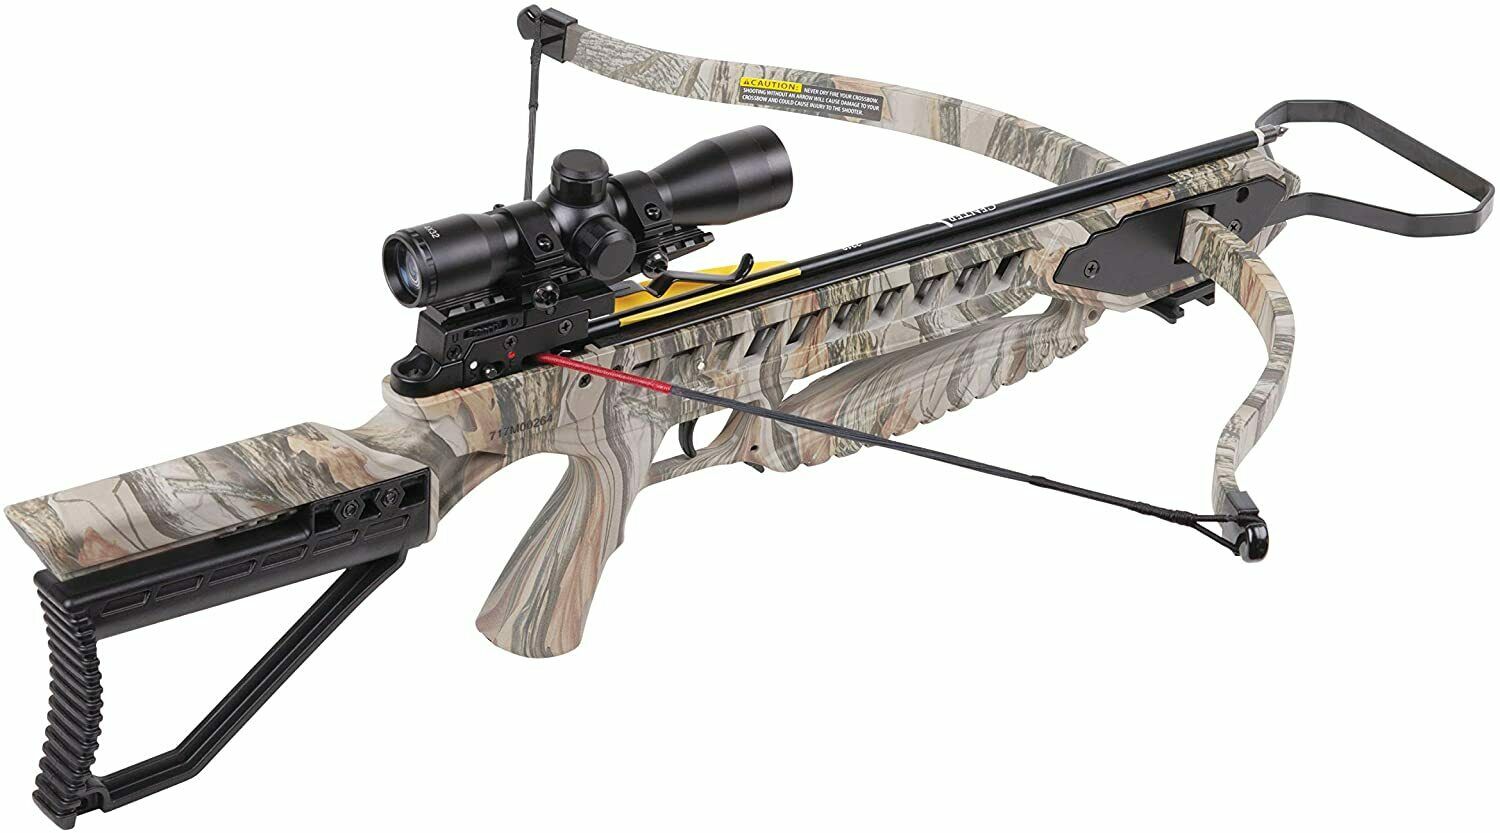 centerpoint-tyro-4x-recurve-crossbow-package-with-4x32mm-scope-camo